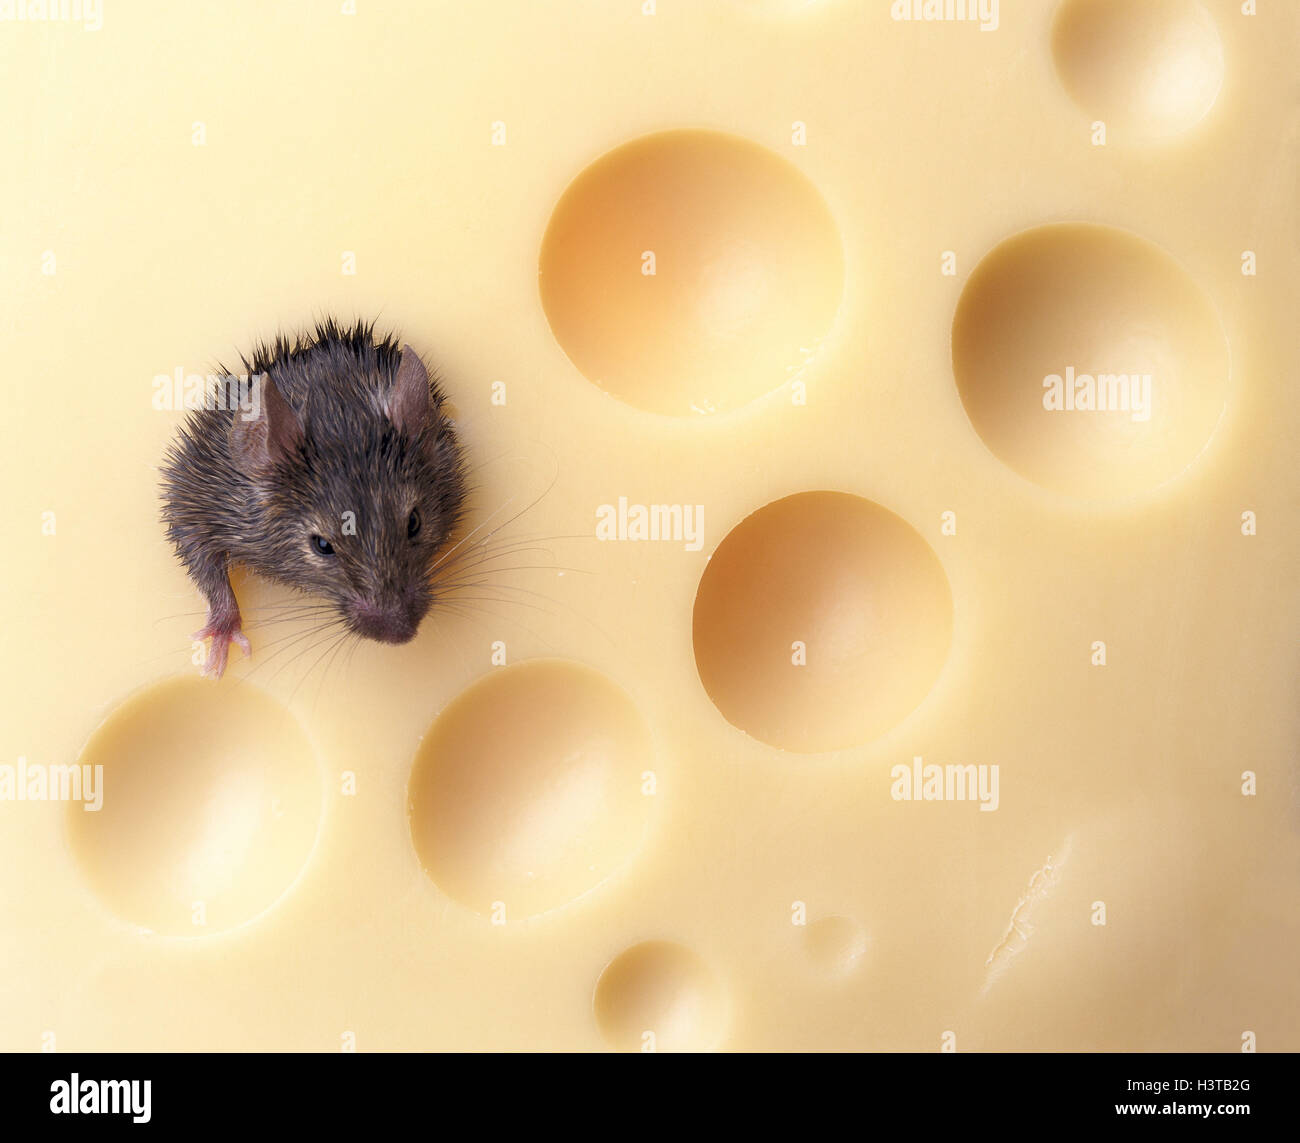 Cheese, mouse, food search humor, fun, stay-at-home, mush muscle, mammals, mammal, rodents, rodent, Rodentia, mouse, Muridae, stock pest, vector, pest, creeps, eats hole, cheese loaf, Swiss cheese, Swiss cheese, Stock Photo